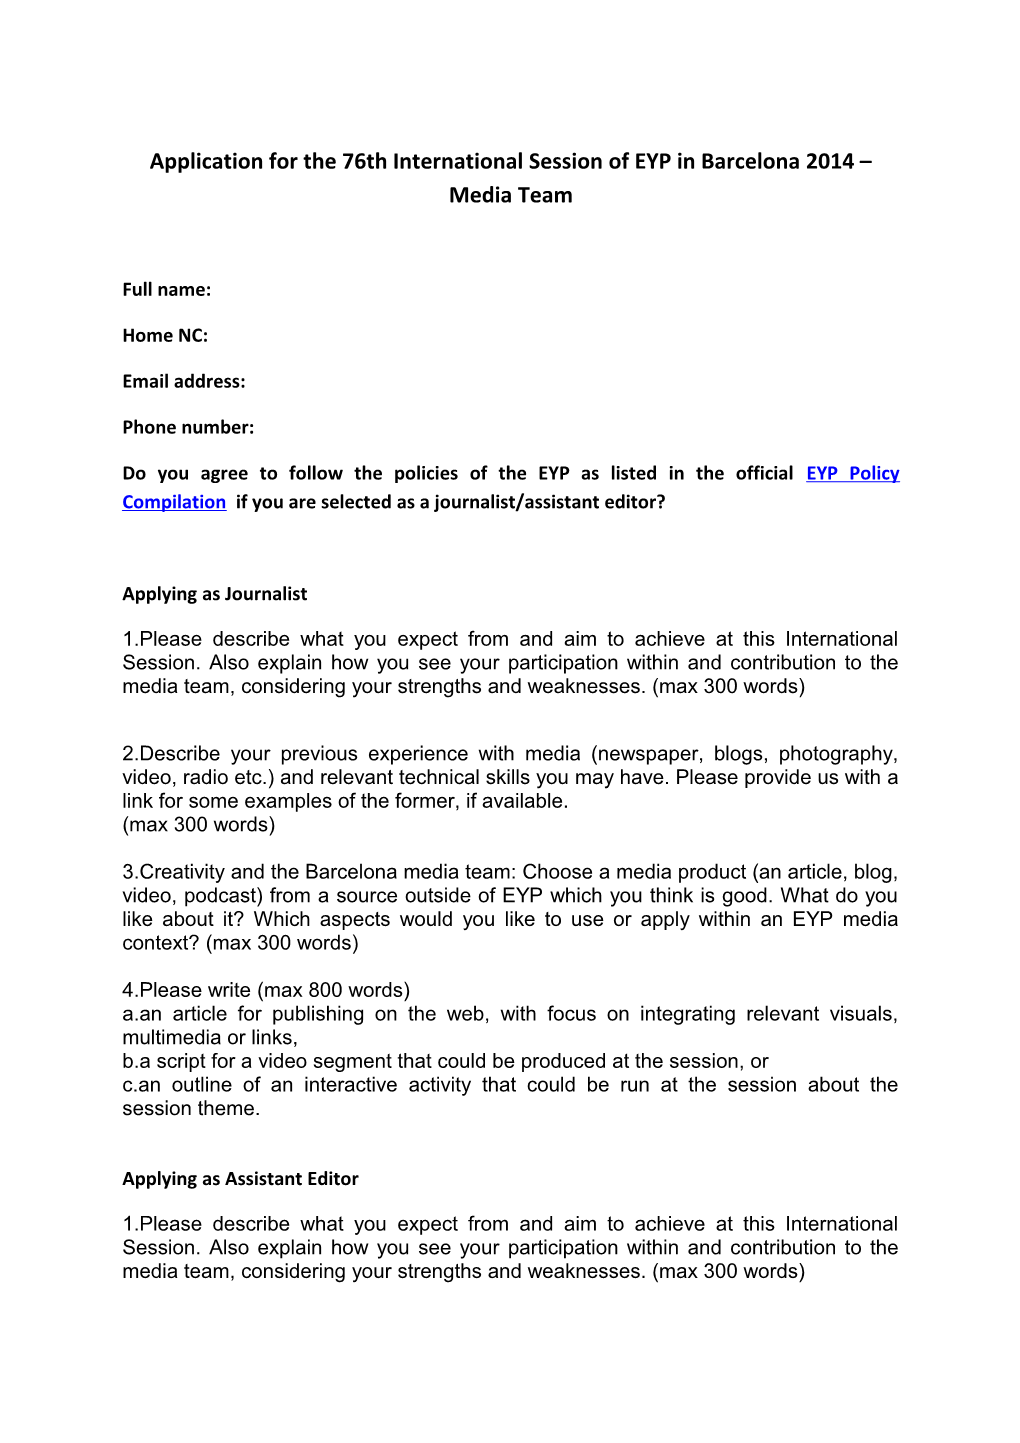 Application for the 76Th International Session of EYP in Barcelona 2014 Media Team